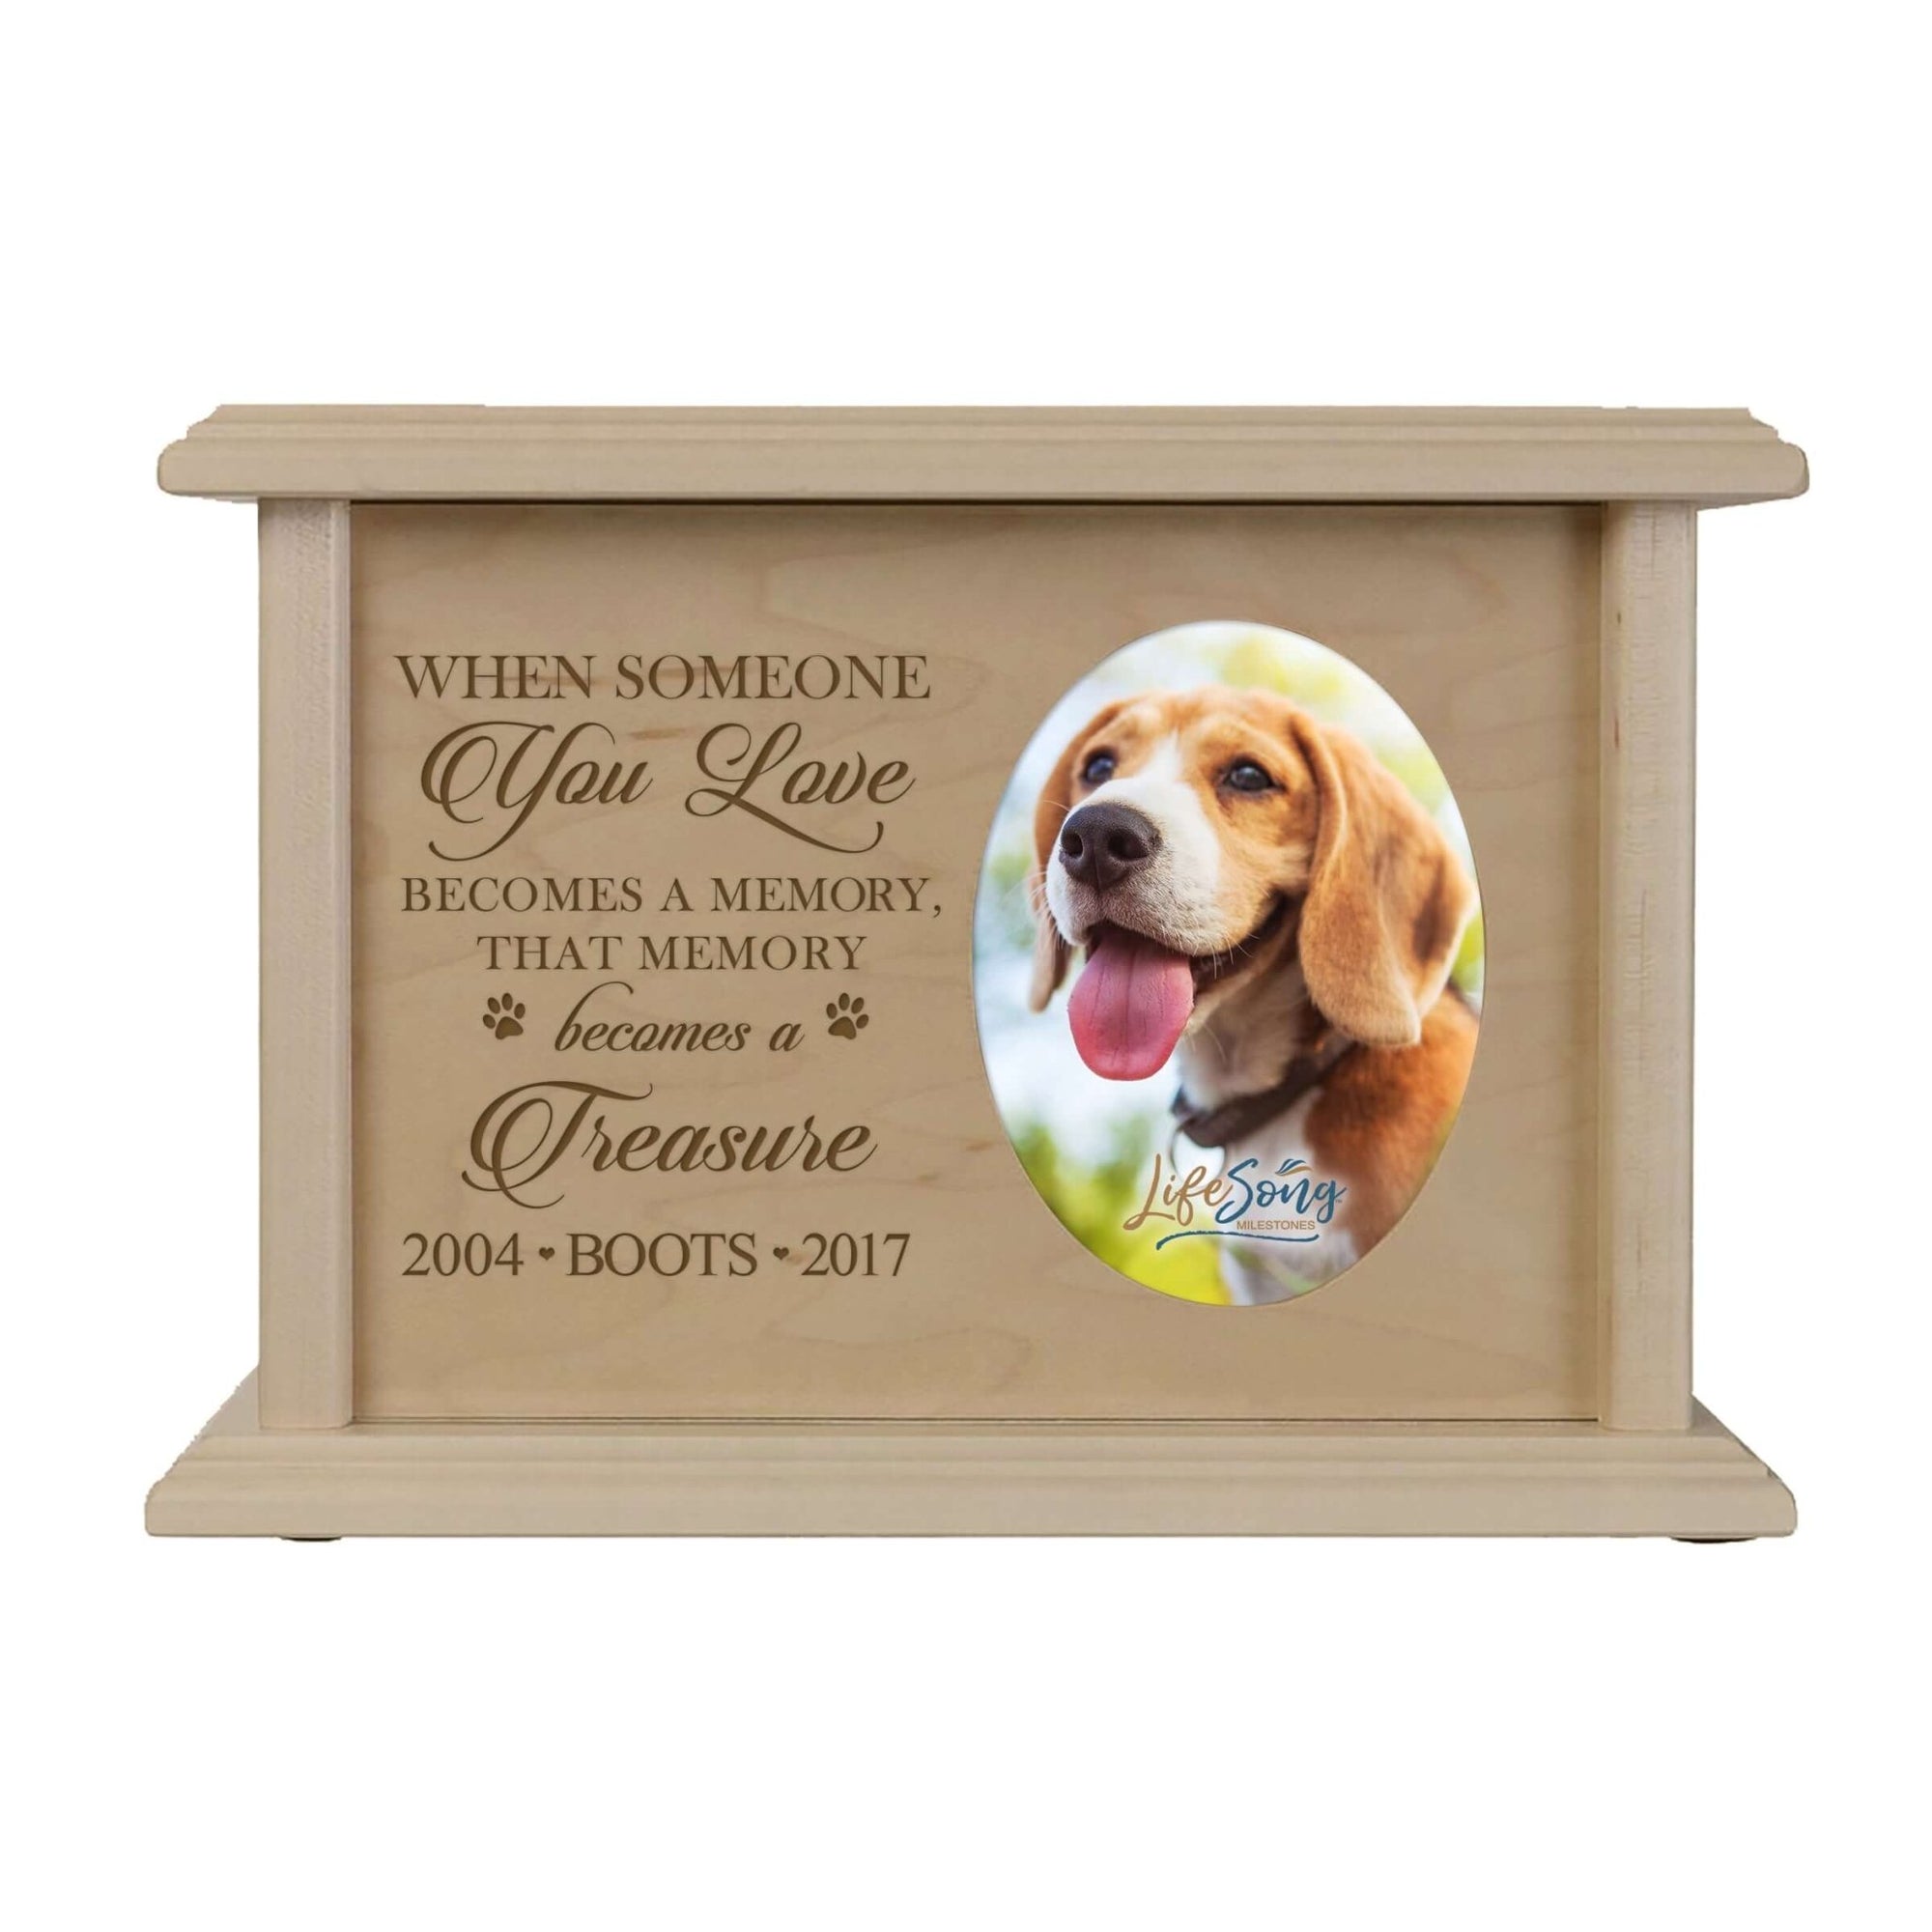 Pet Memorial Picture Cremation Urn Box for Dog or Cat - When Someone You Love Becomes A Memory - LifeSong Milestones